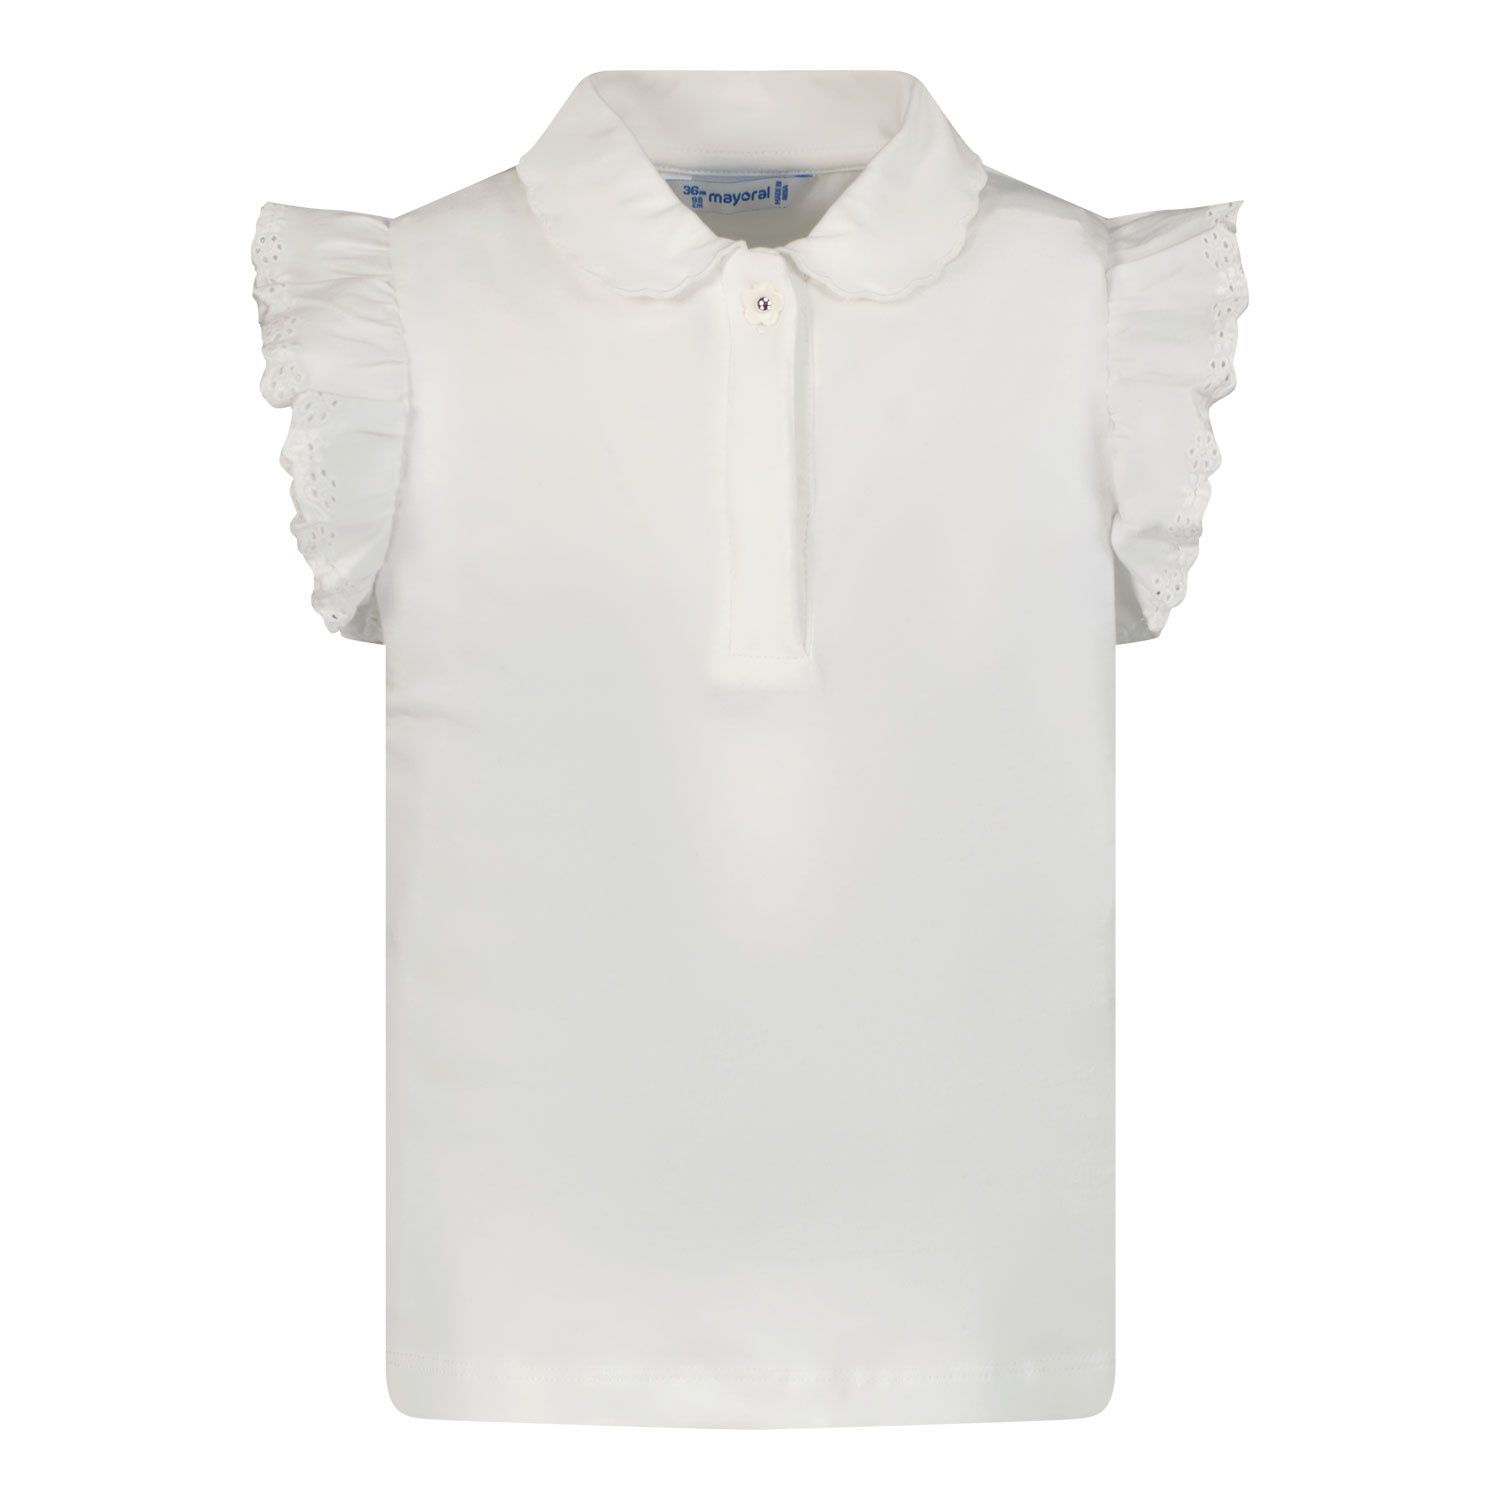 Picture of Mayoral 1184 baby poloshirt white